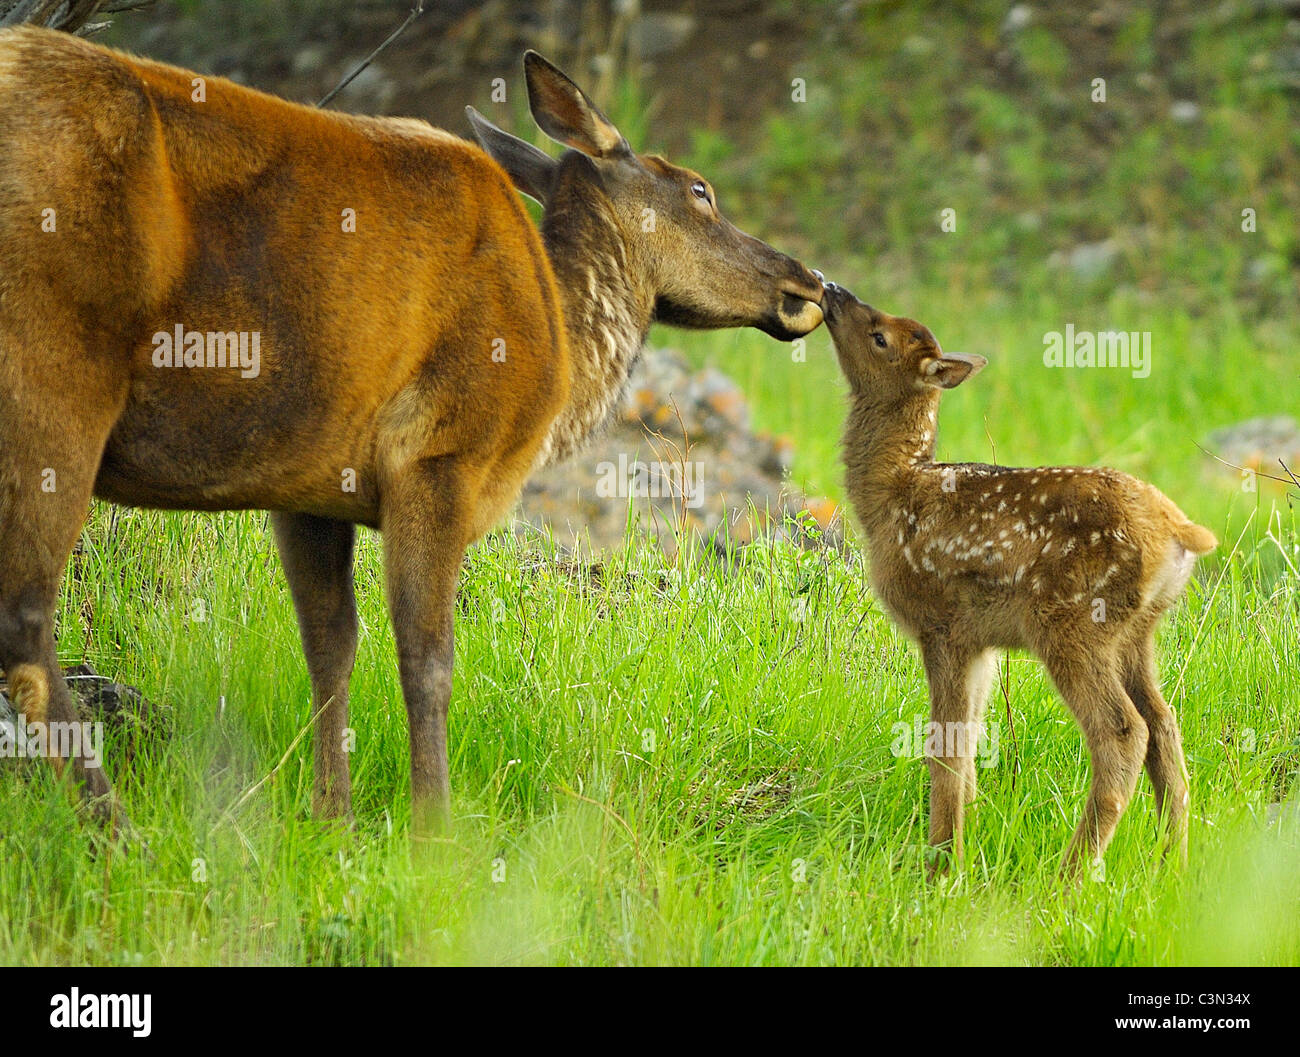 A newborn elk calf kisses its mother late spring in the Rockies. Stock Photo